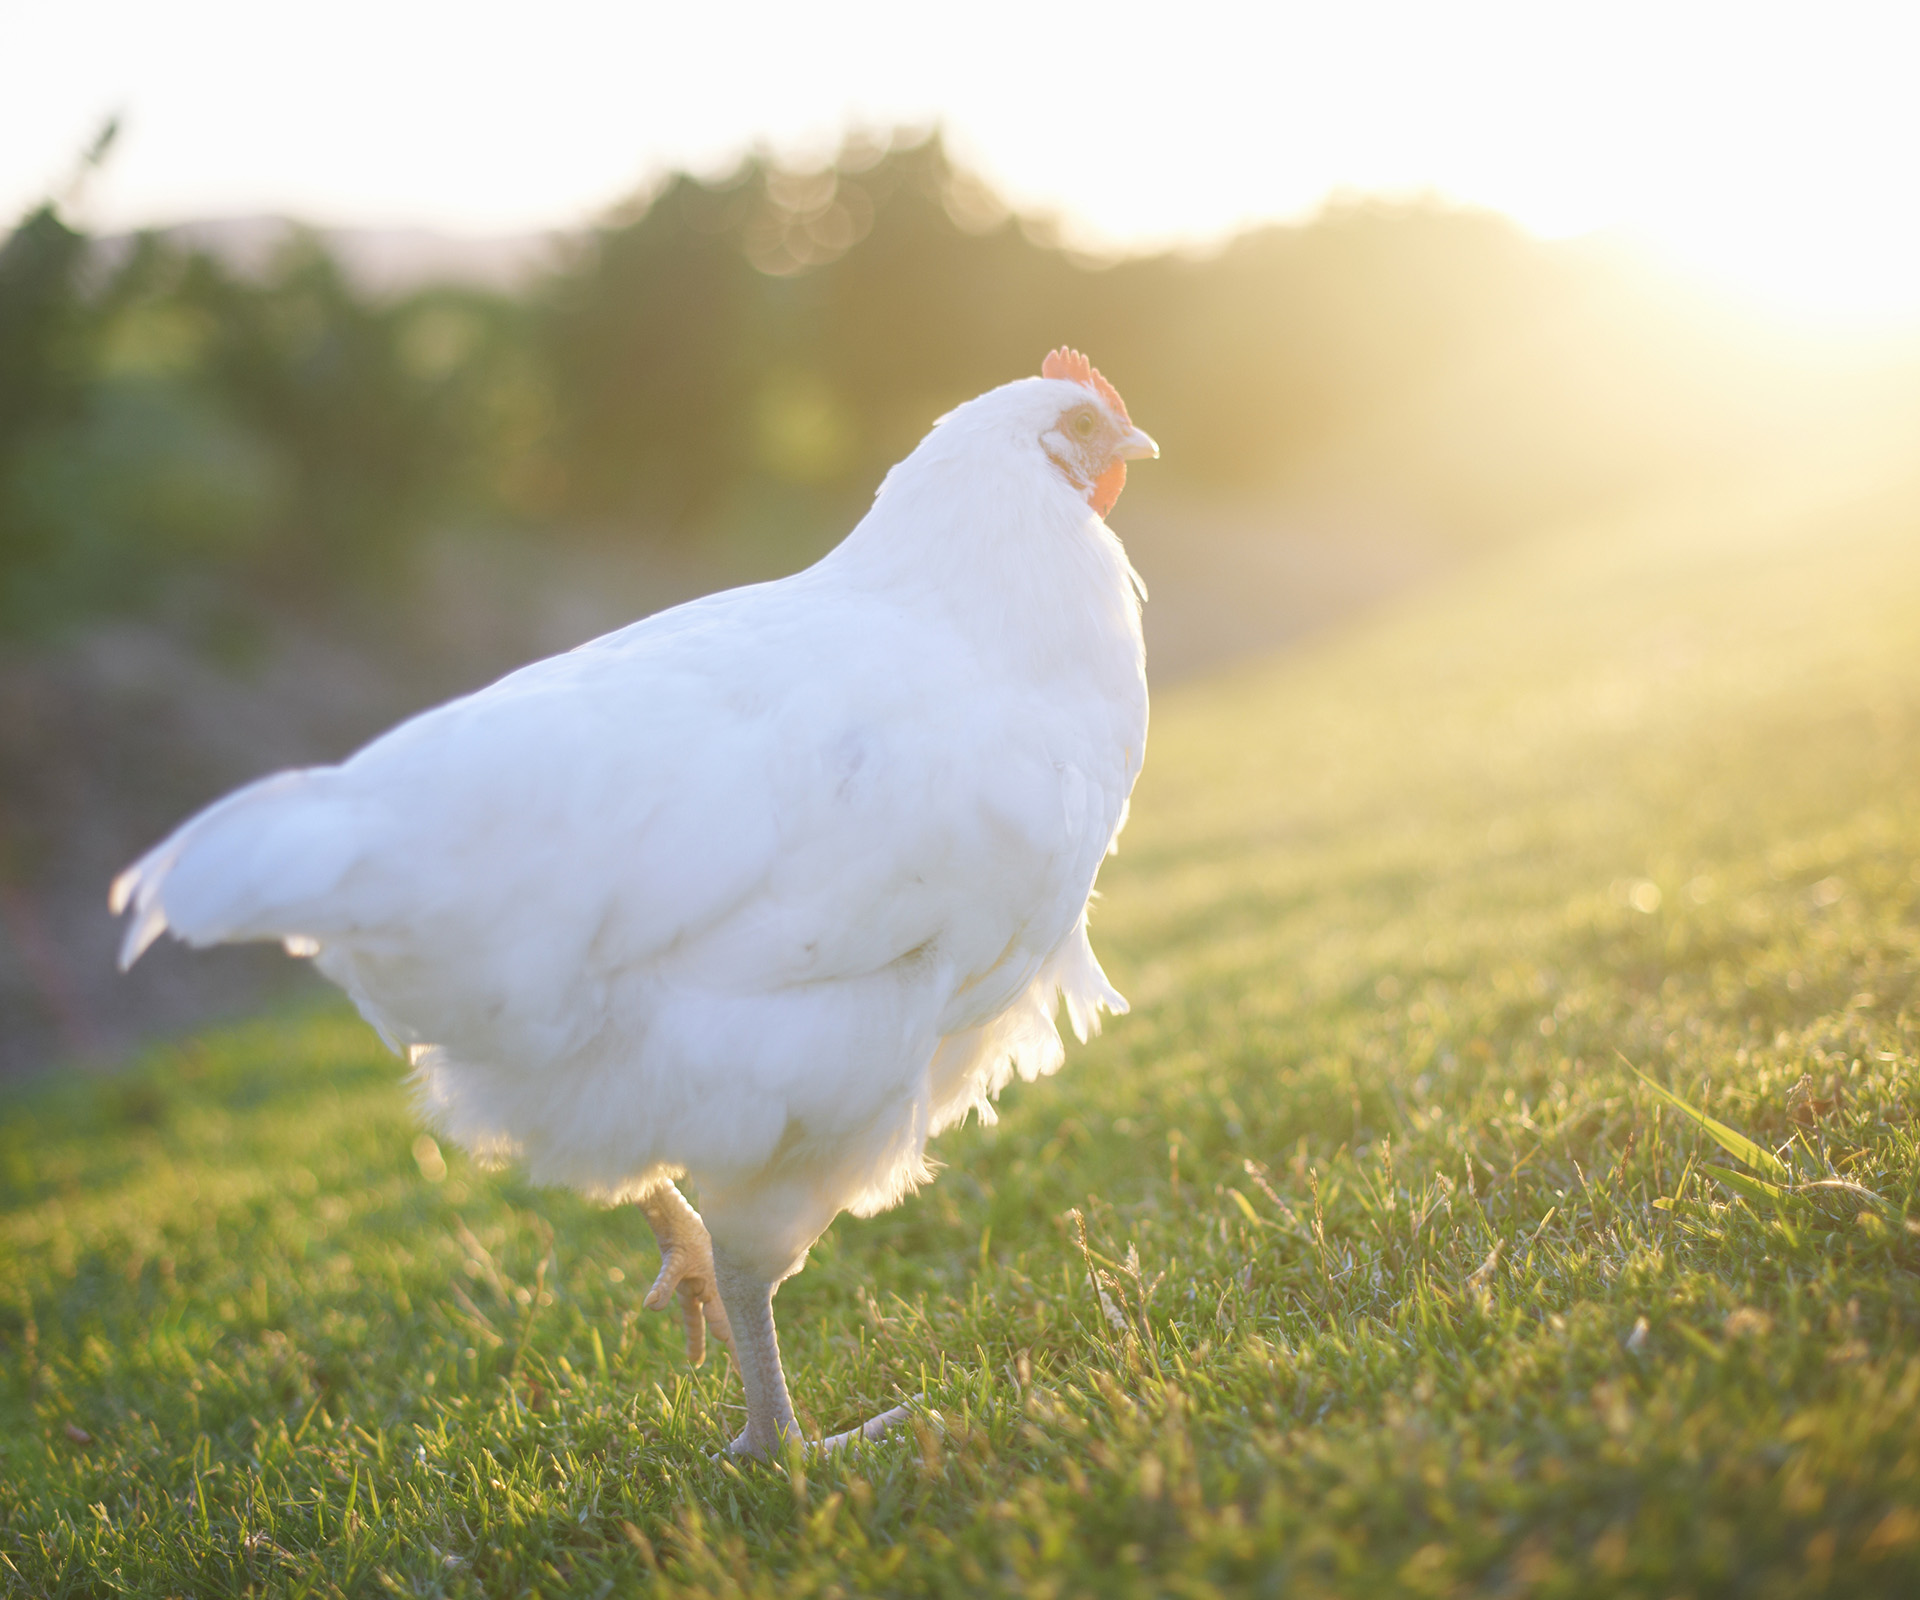 McDonald’s to switch to only cage-free eggs in US by 2025